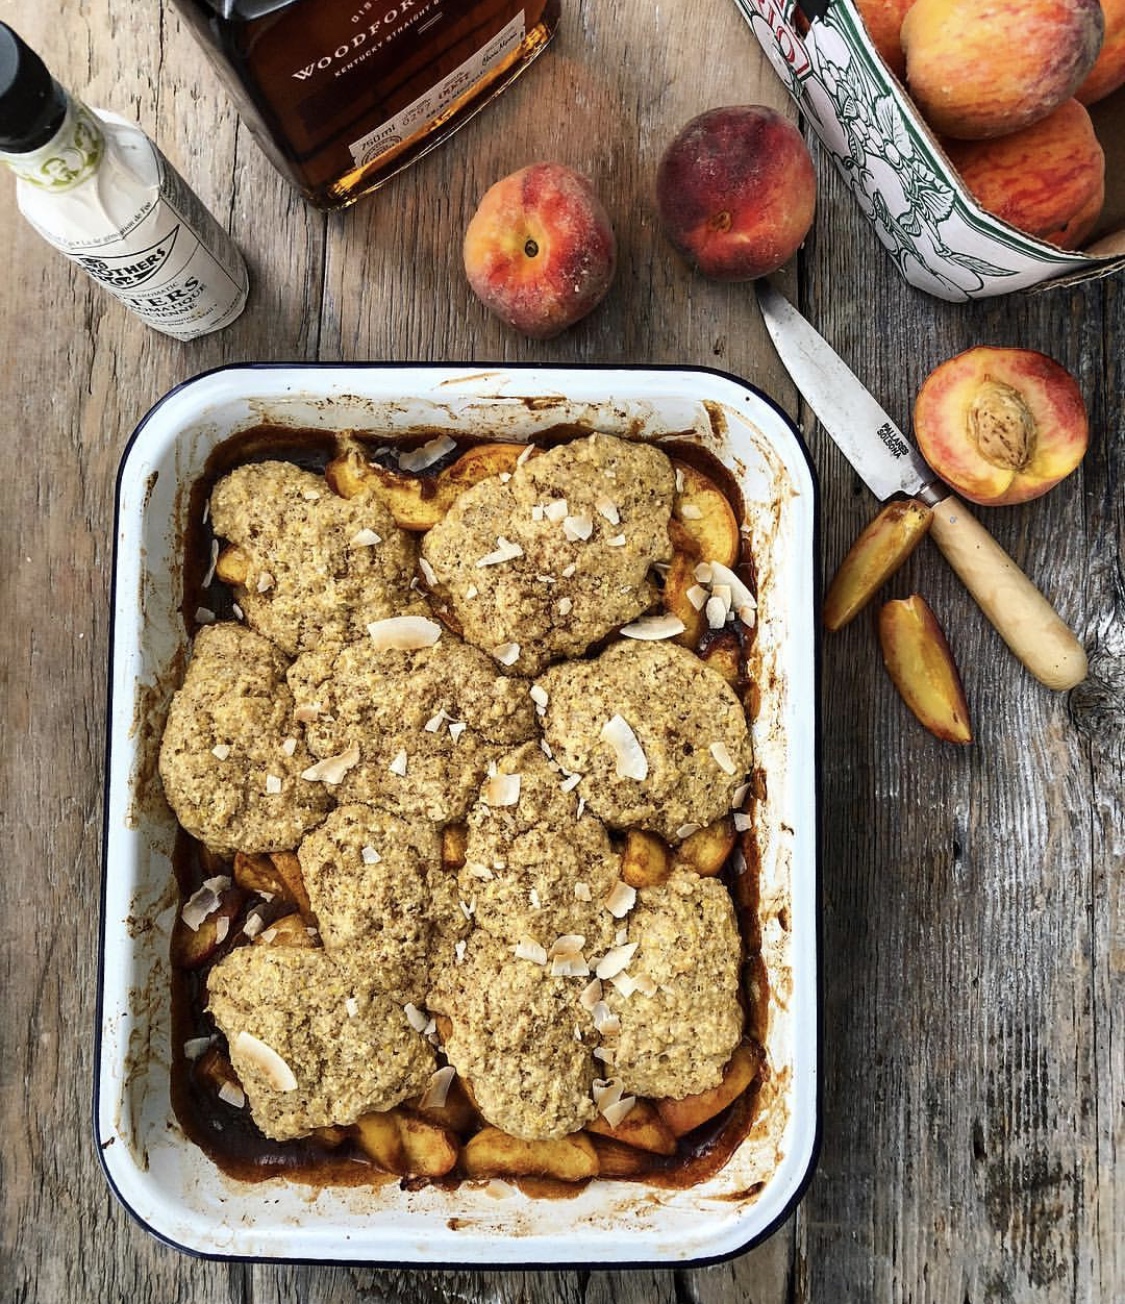 Spicy Maple Bourbon Peach Cobbler with a Cornmeal Topping ...